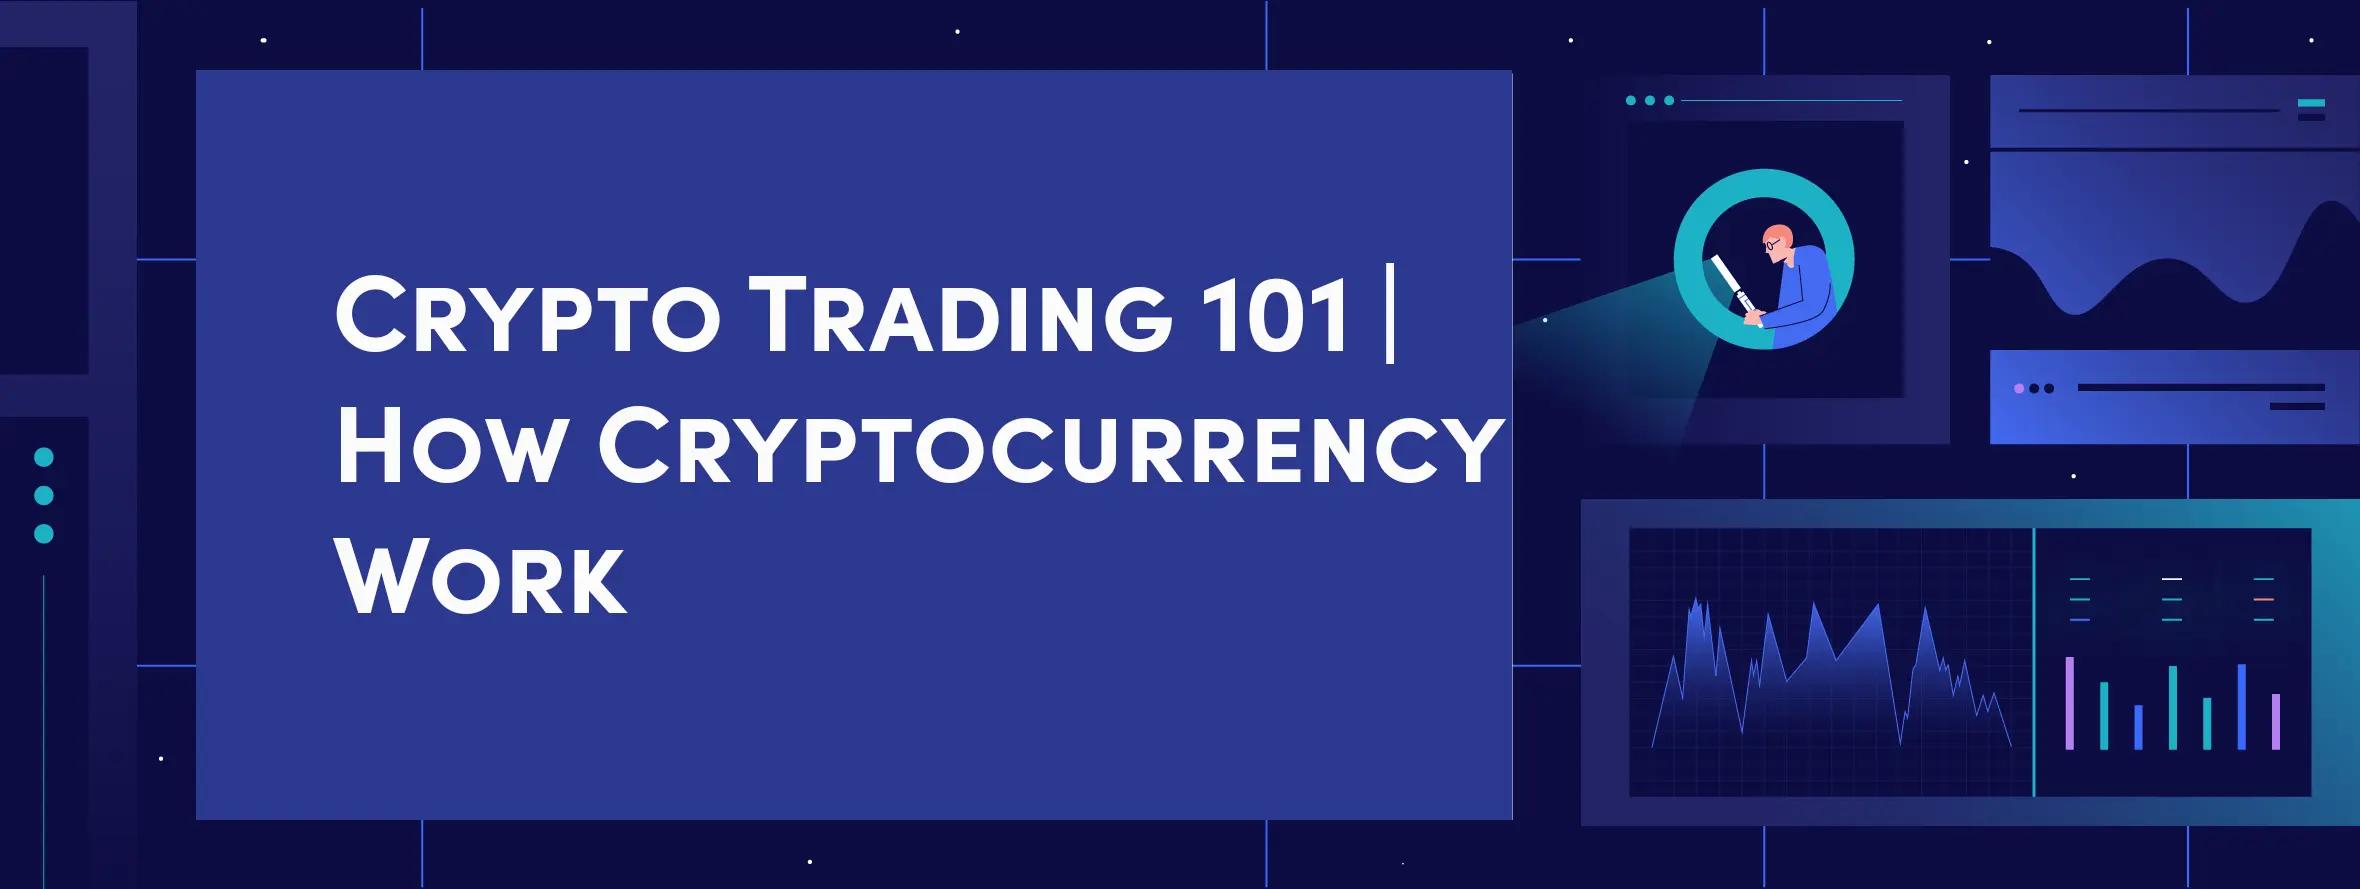 Crypto Trading 101 | How Cryptocurrency Works